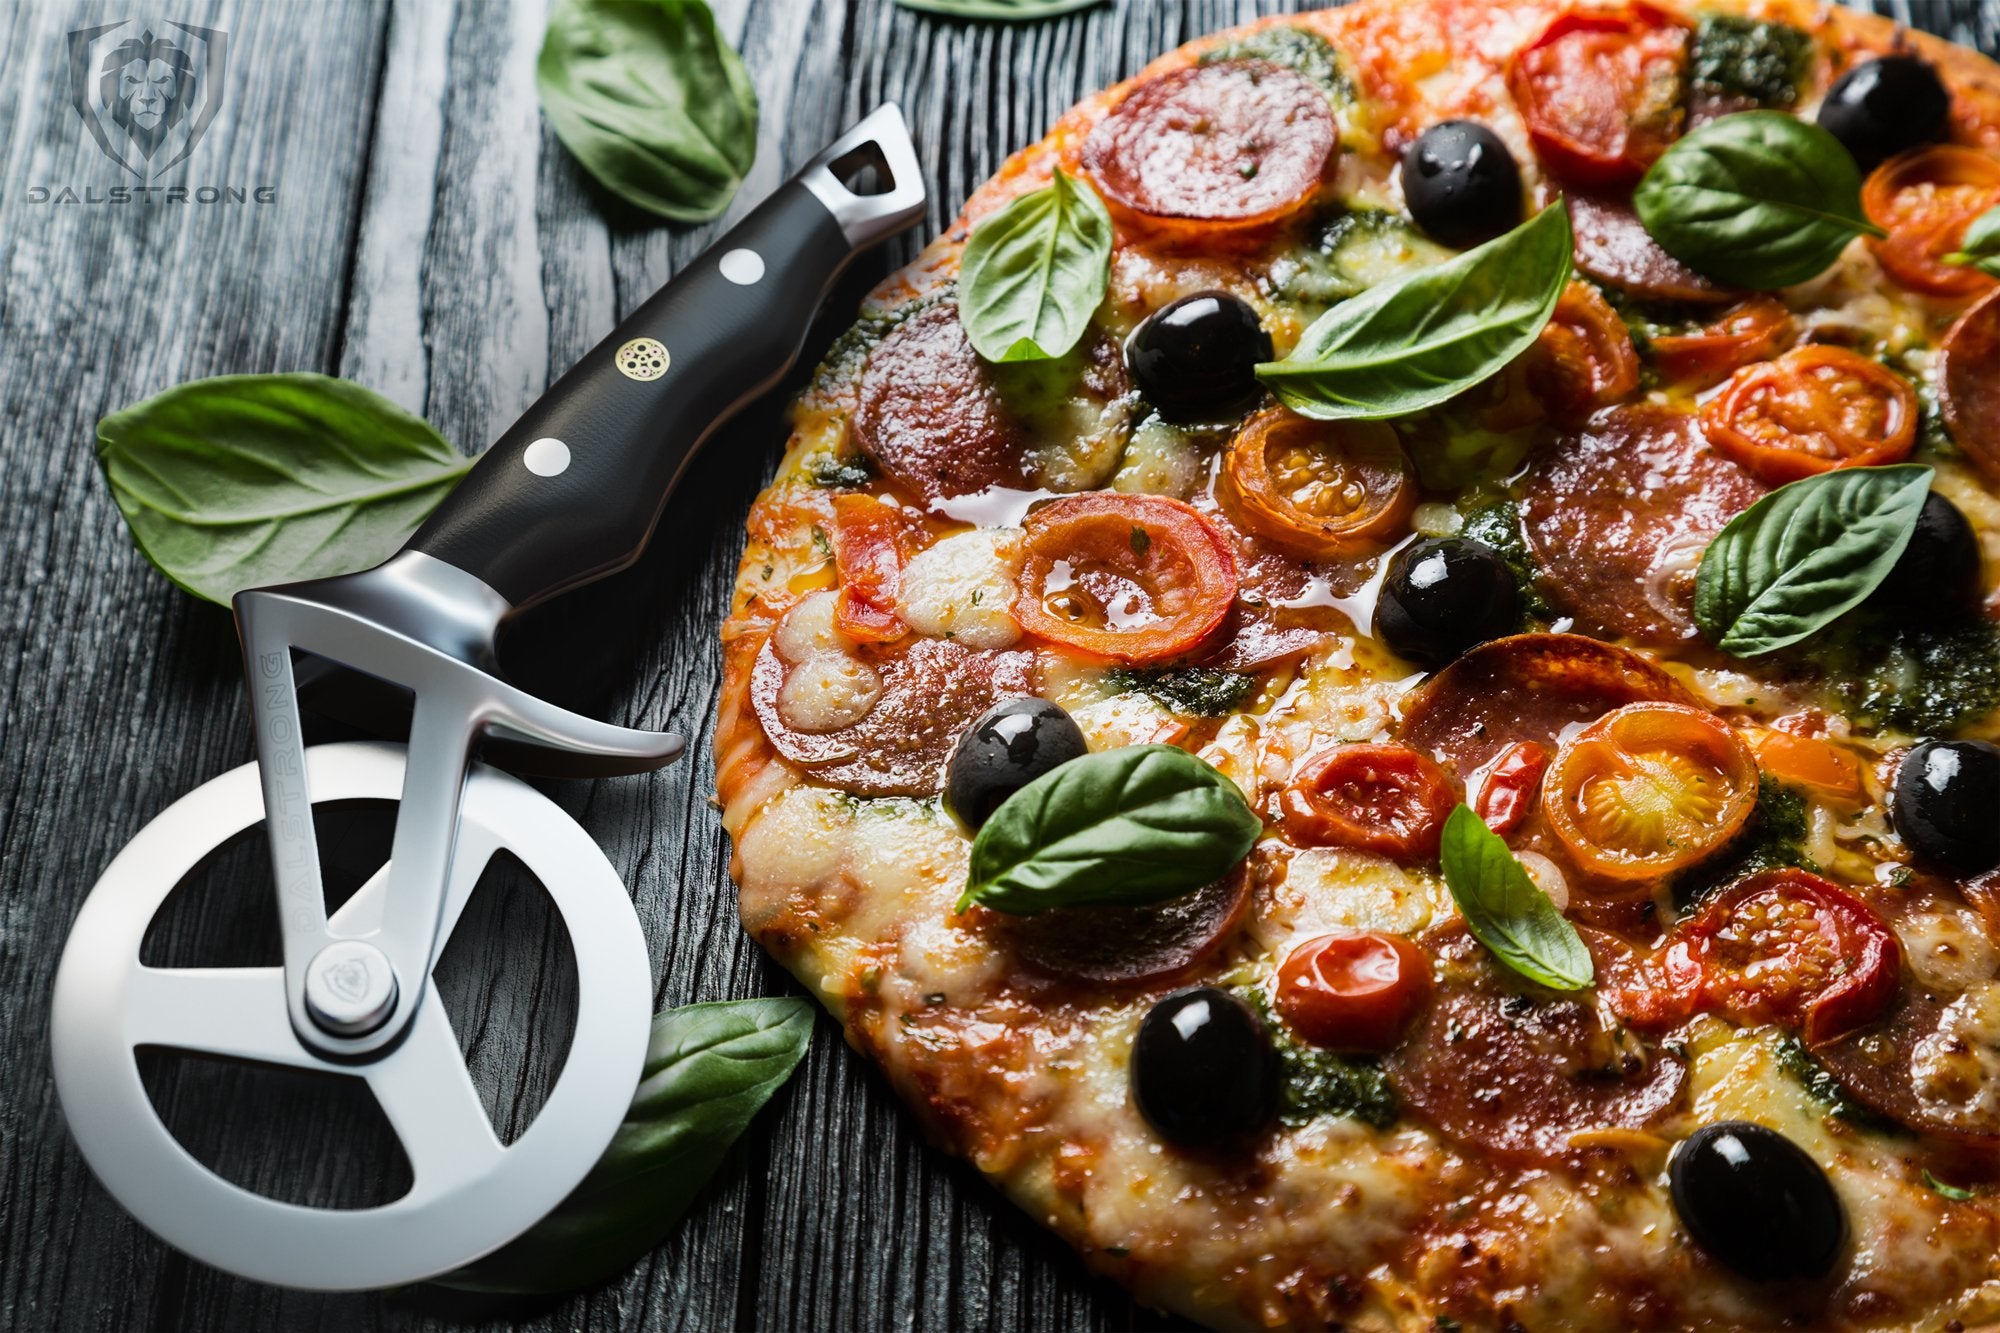 75 Best Homemade Pizza Recipes - How To Make Pizza at Home